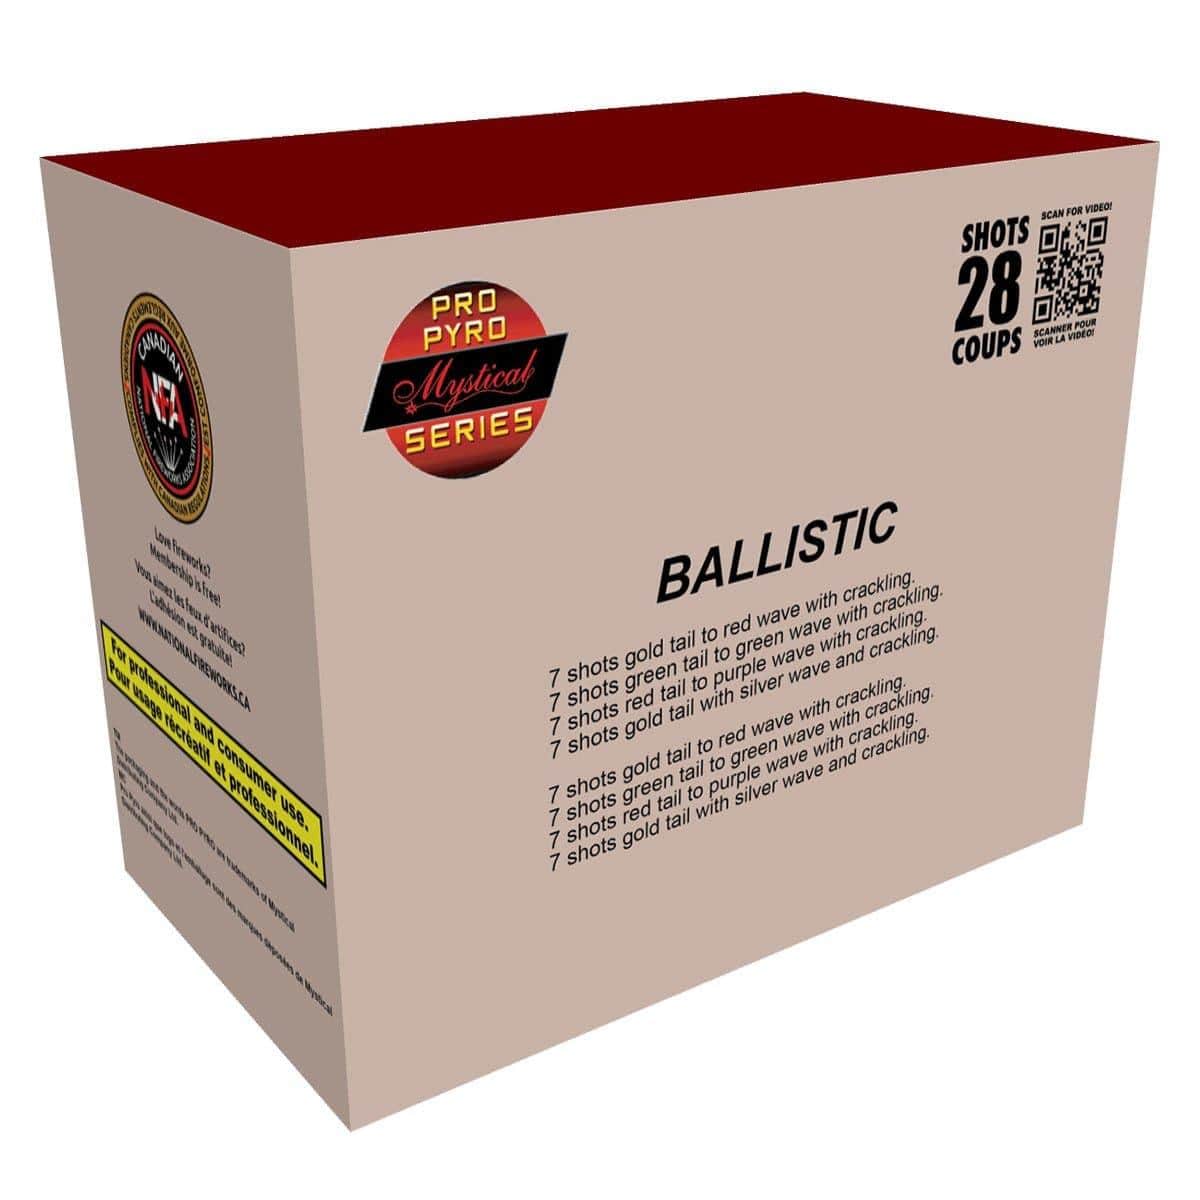 Buy Fireworks Ballistic sold at Party Expert